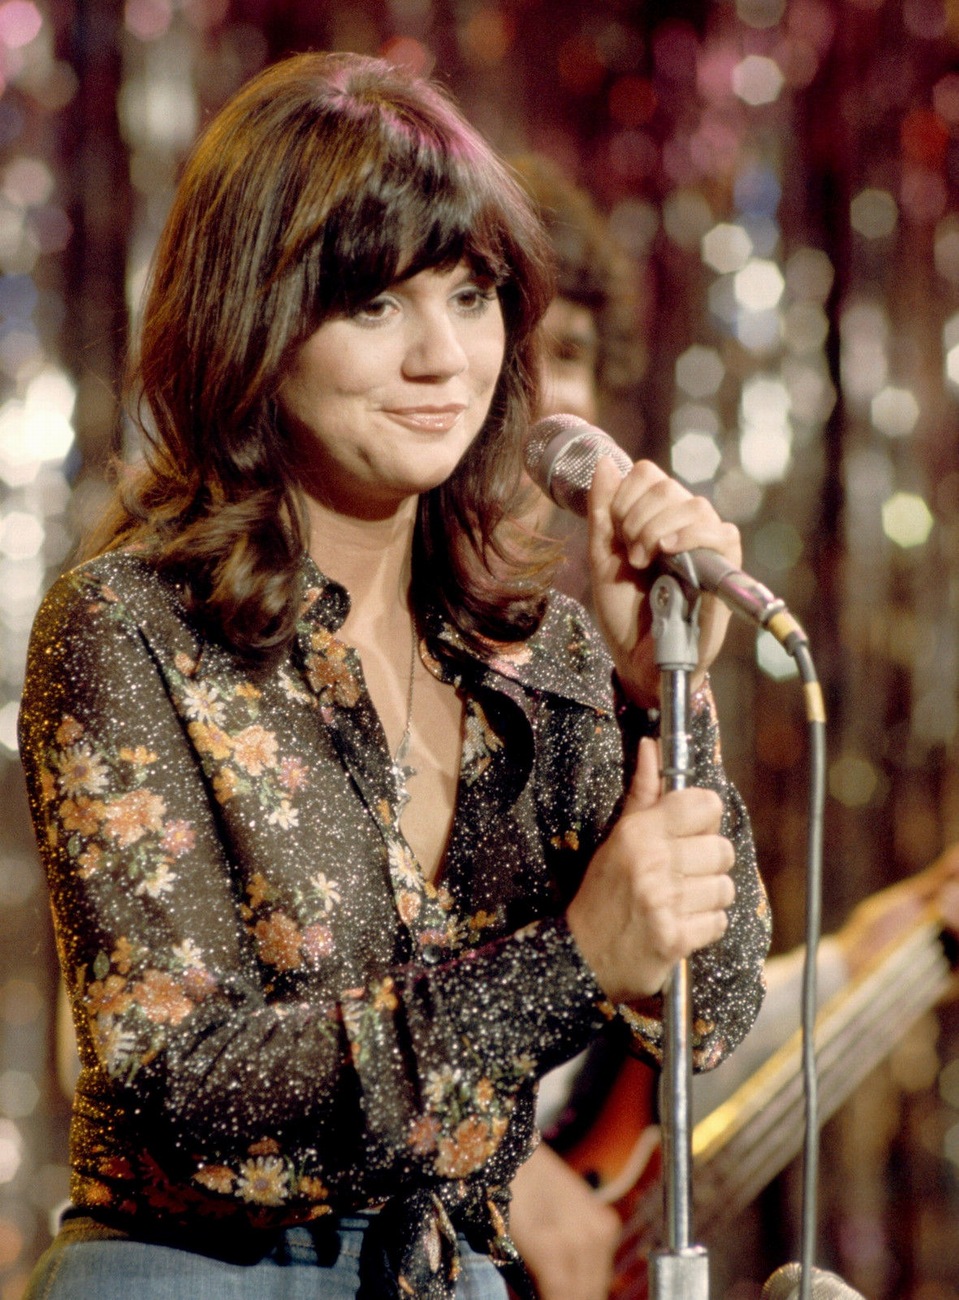 Happy birthday to one of my favs--Linda Ronstadt! 